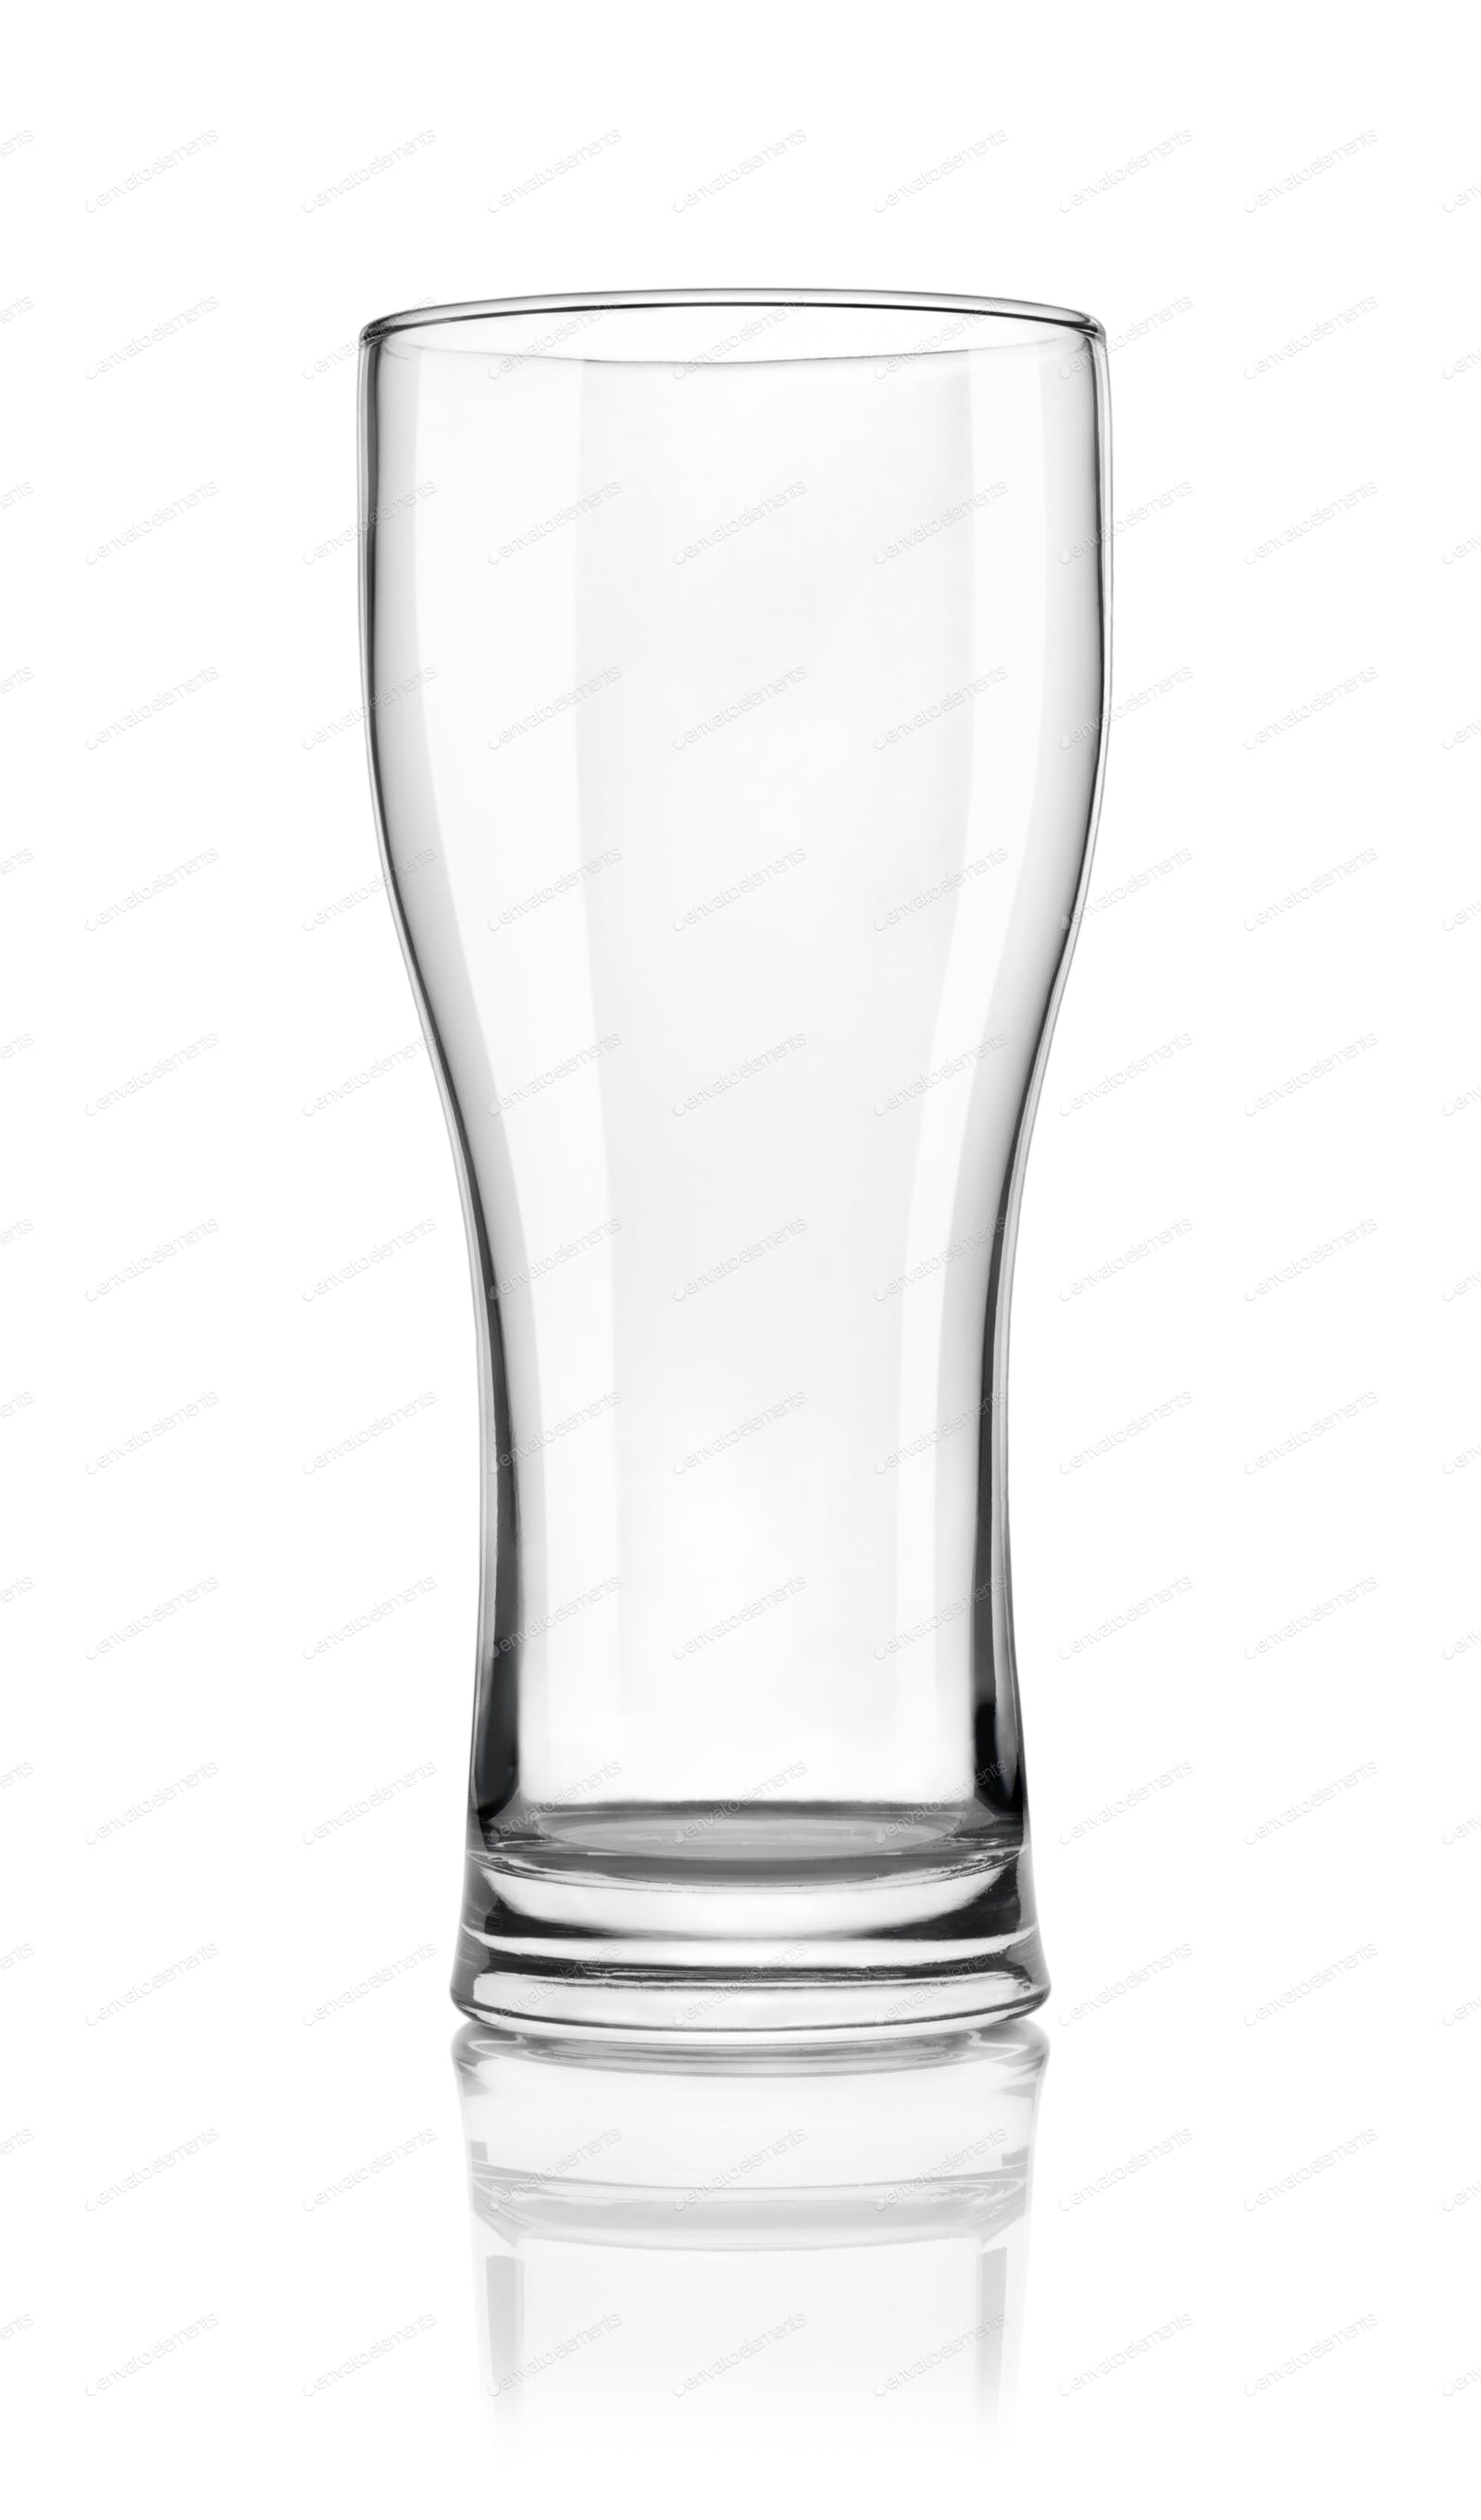 Empty beer glass photo by Givaga on Envato Elements